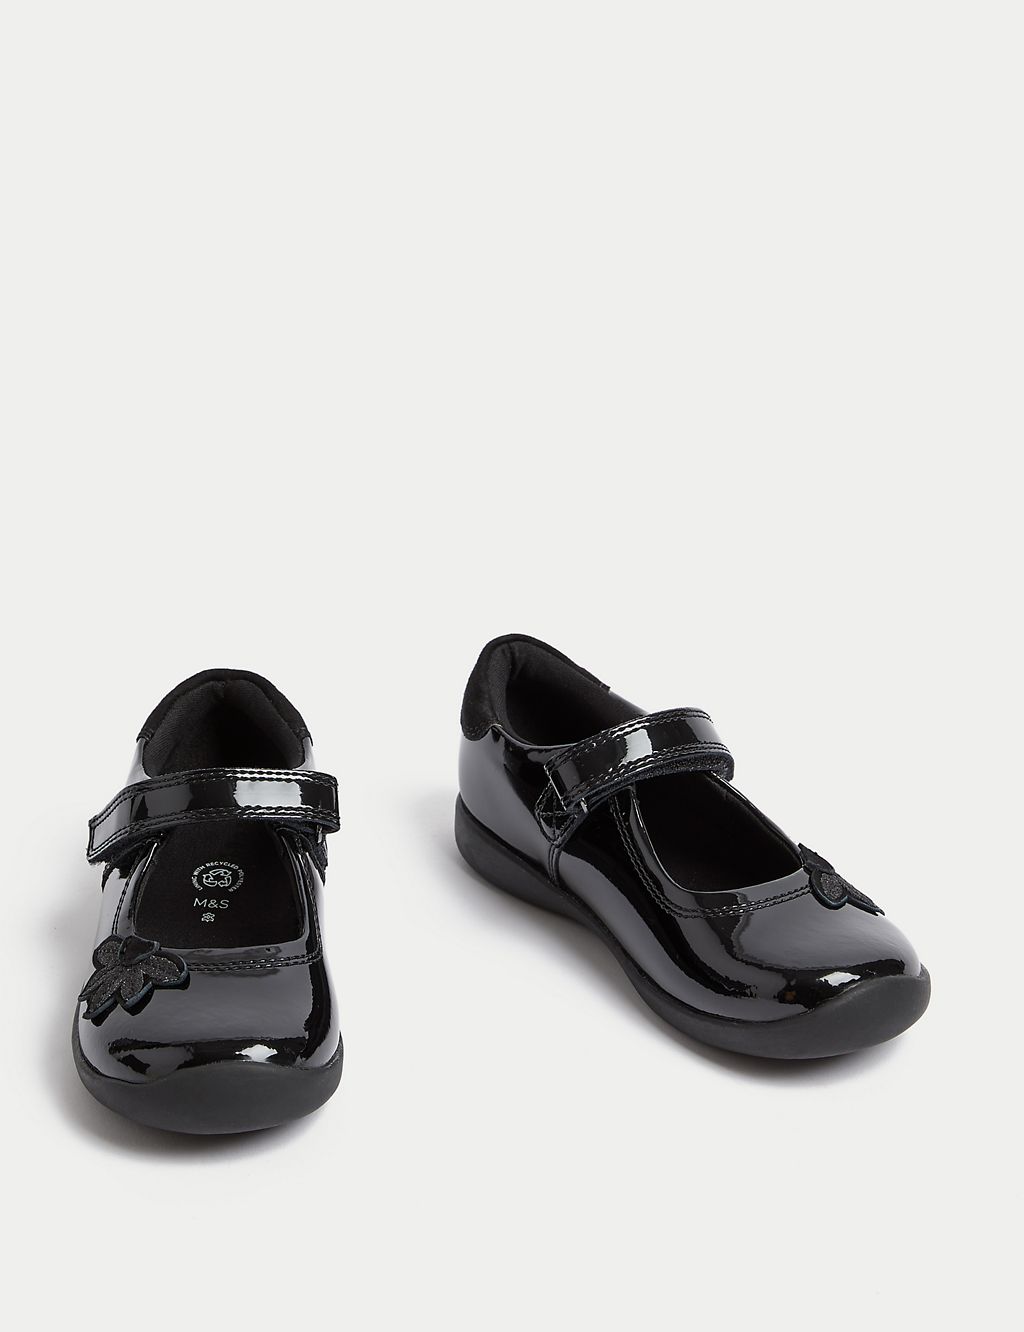 Kids Patent Leather School Shoes (8 Small - 1 Large) 1 of 5